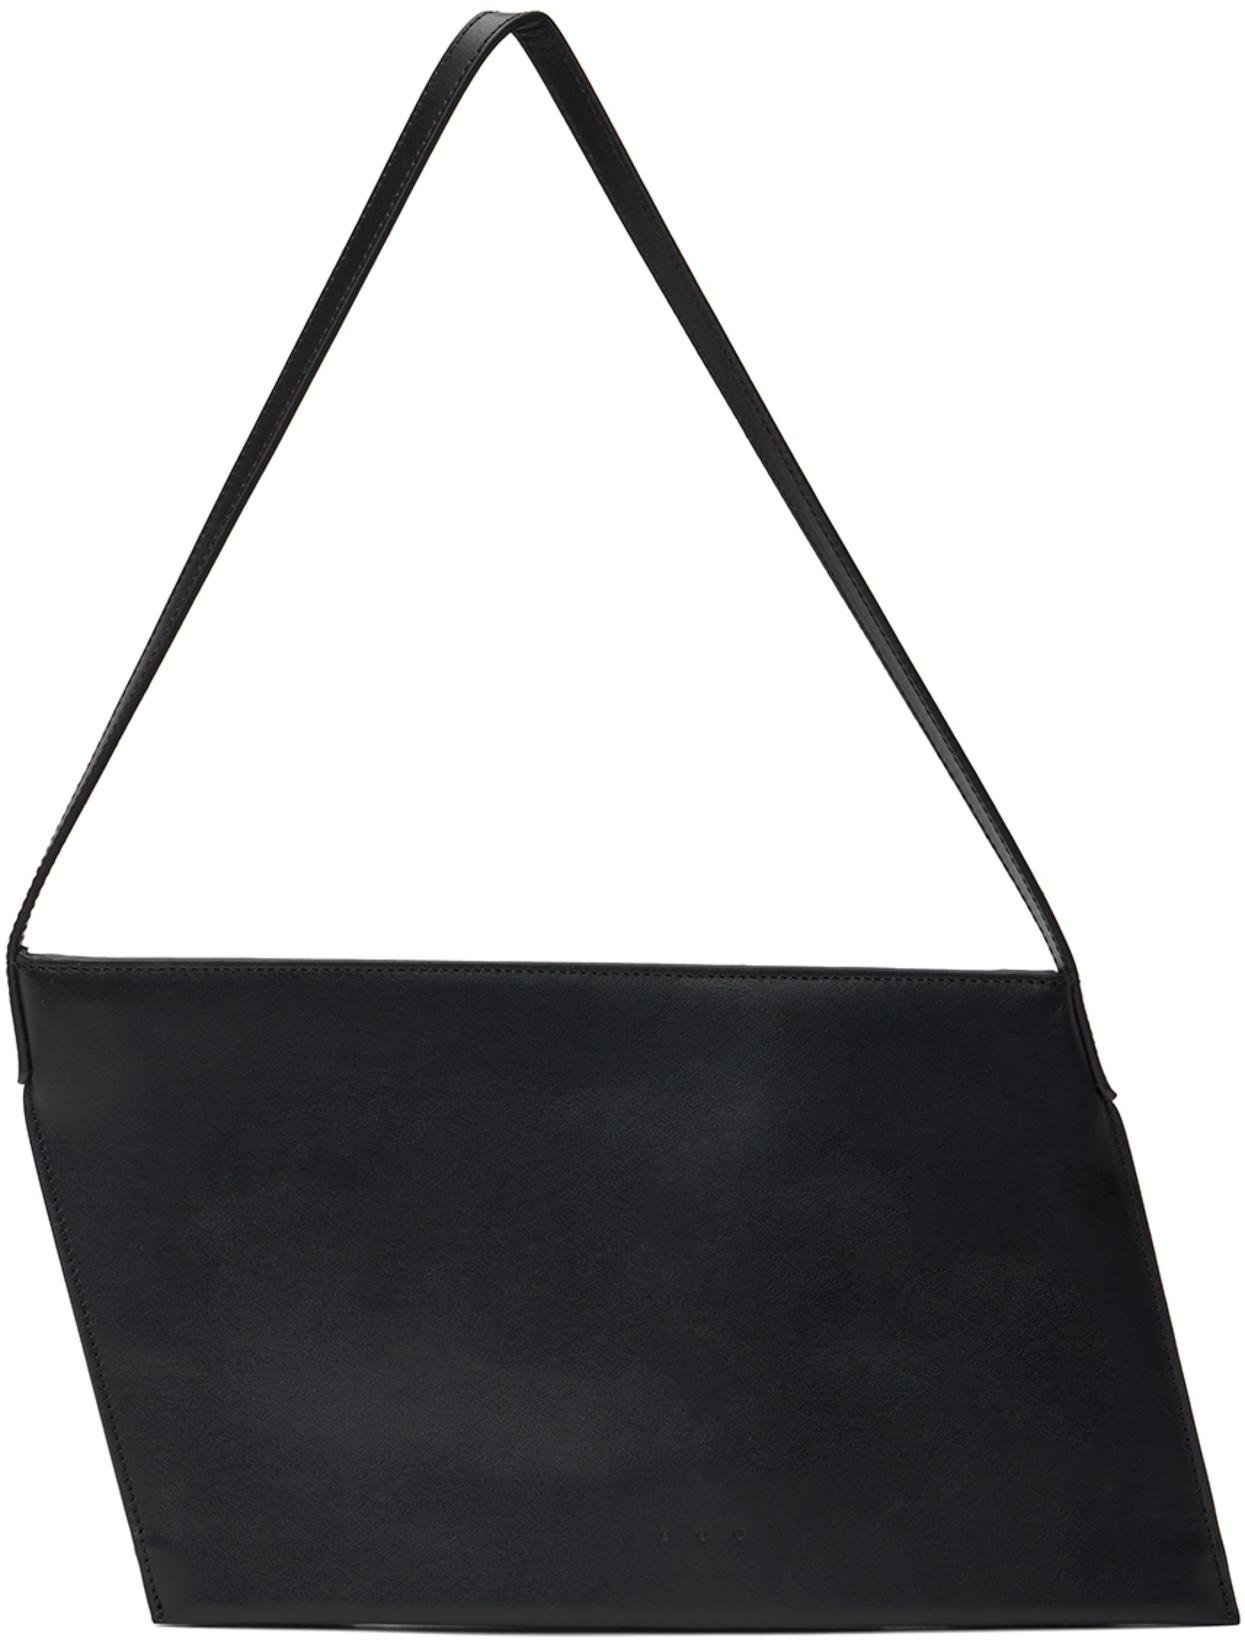 Black Angle Clutch Shoulder Bag by AESTHER EKME